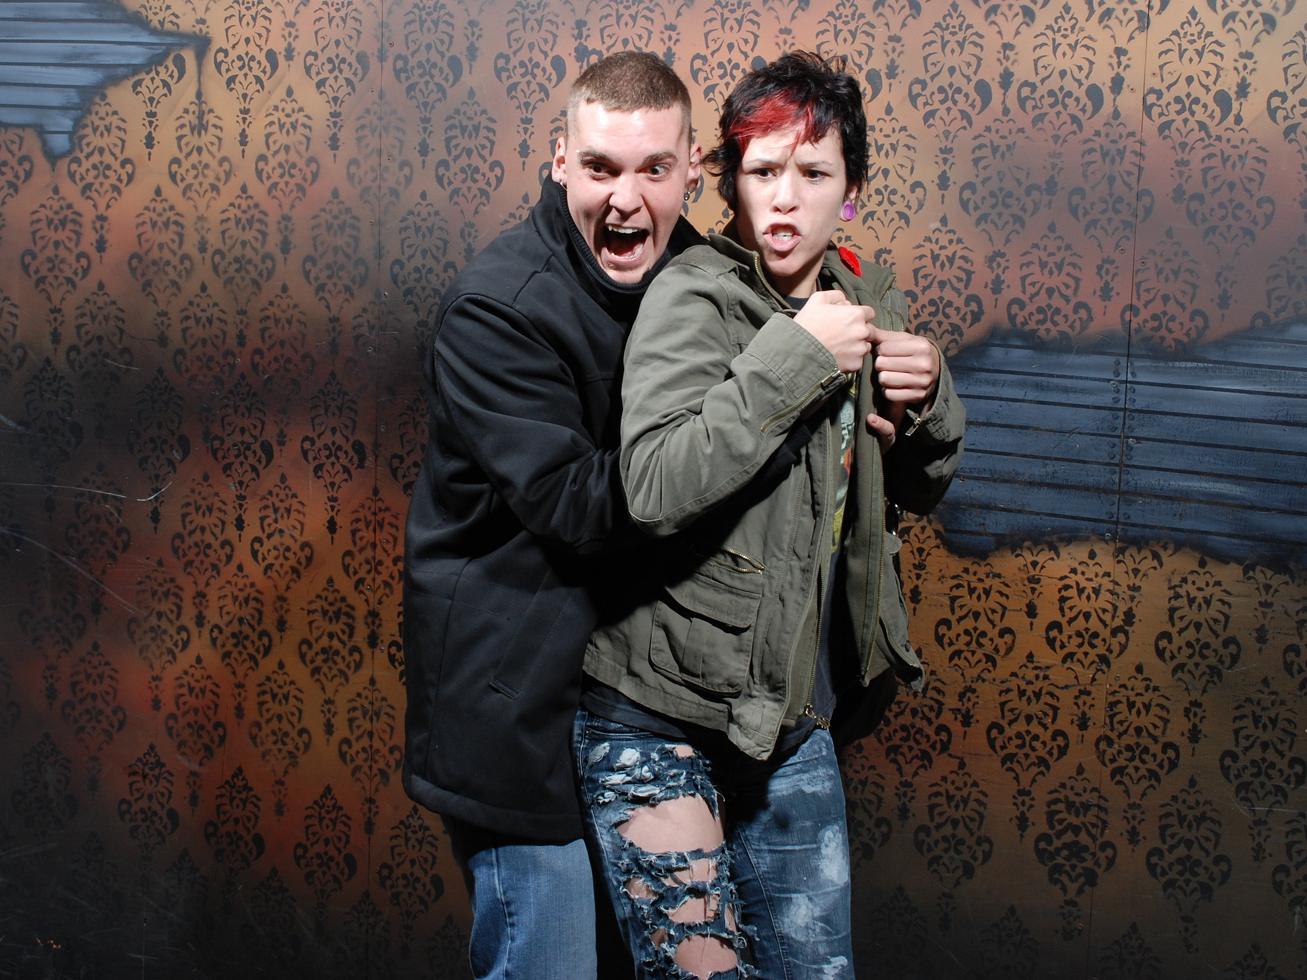 Top 10 FEAR Pics for the week of December 17, 2012 | Nightmares Fear ...